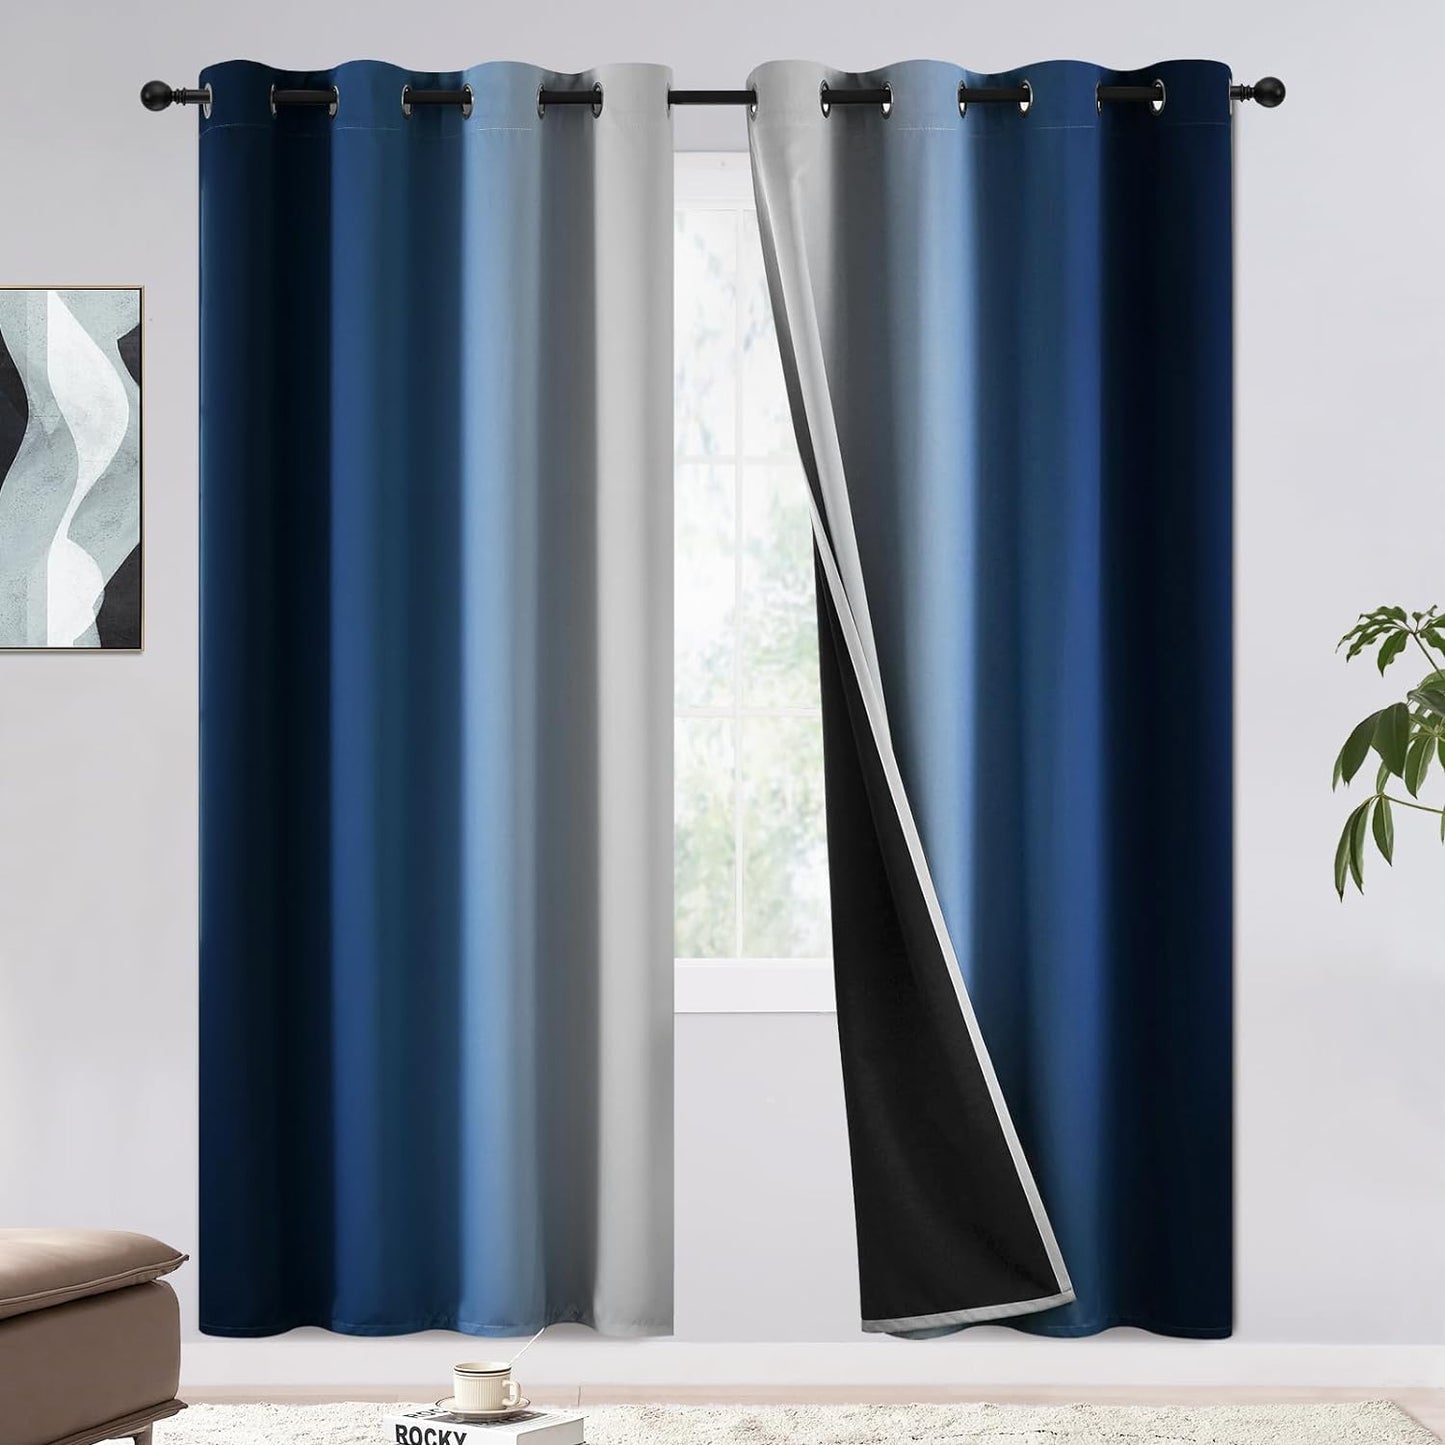 COSVIYA 100% Blackout Curtains & Drapes Ombre Purple Curtains 63 Inch Length 2 Panels,Full Room Darkening Grommet Gradient Insulated Thermal Window Curtains for Bedroom/Living Room,52X63 Inches  COSVIYA Blue To Greyish White 52W X 72L 